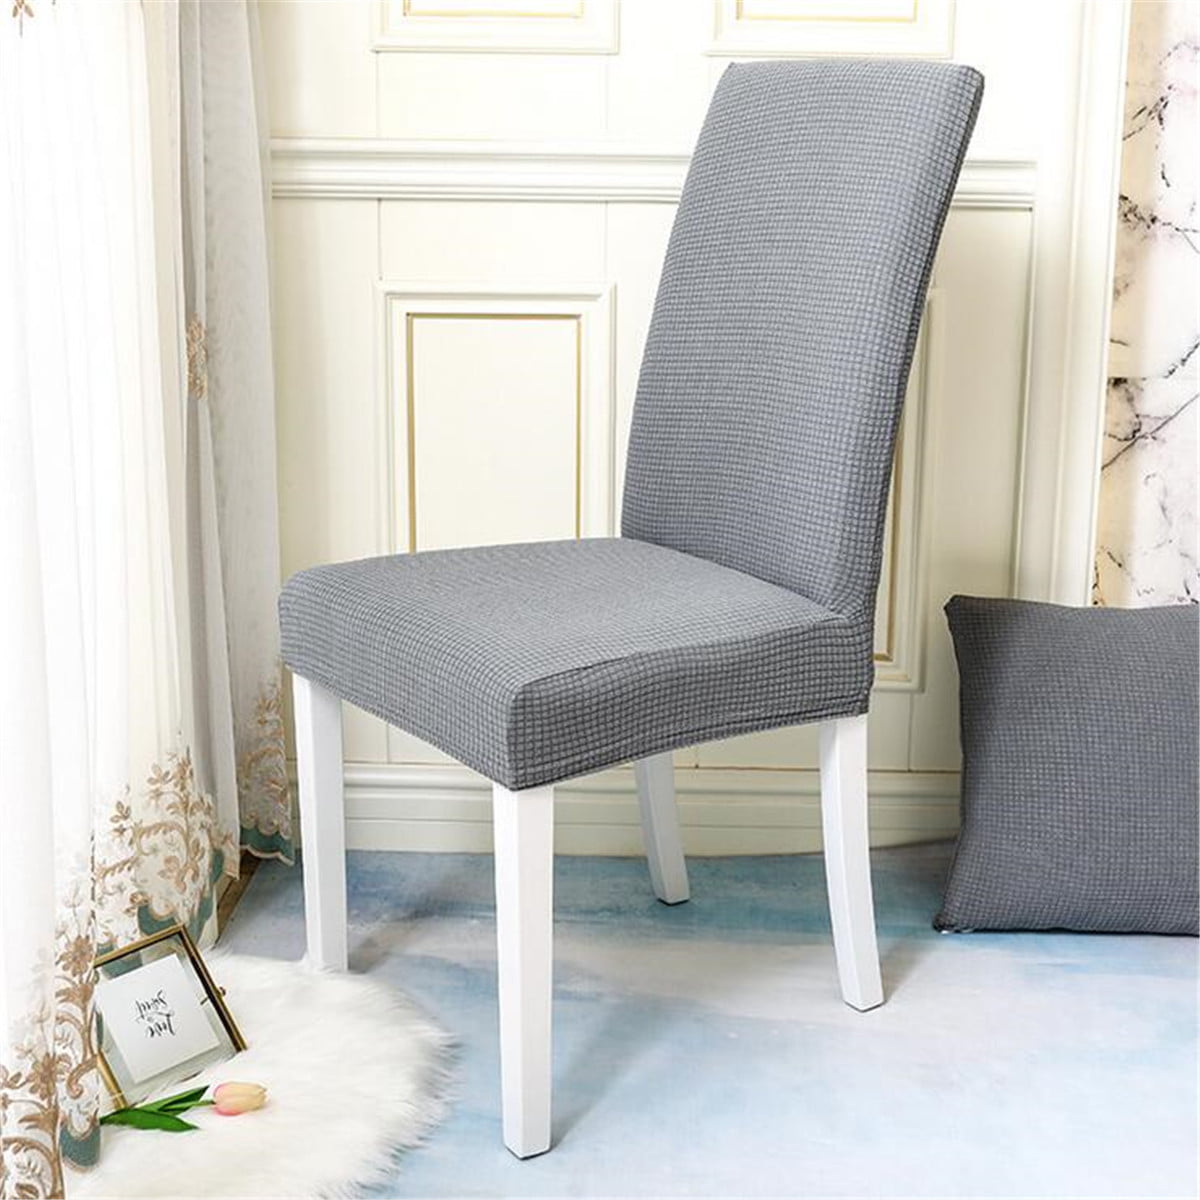 Grey Fabric Stool 48cm with Wooden Legs & Removeable Cover Home Decor Ornament 